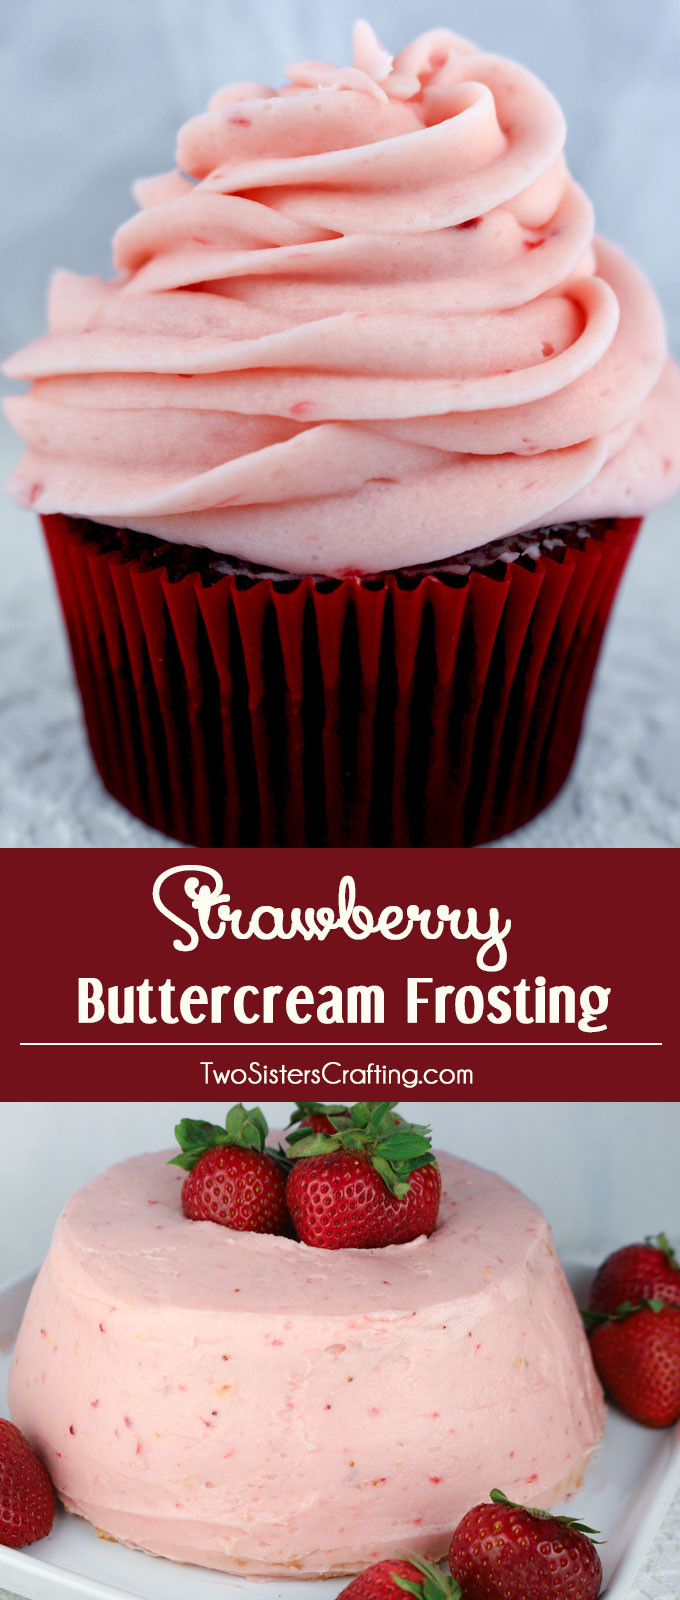 Chocolate Cake With Strawberry Frosting
 The Best Strawberry Buttercream Frosting Two Sisters